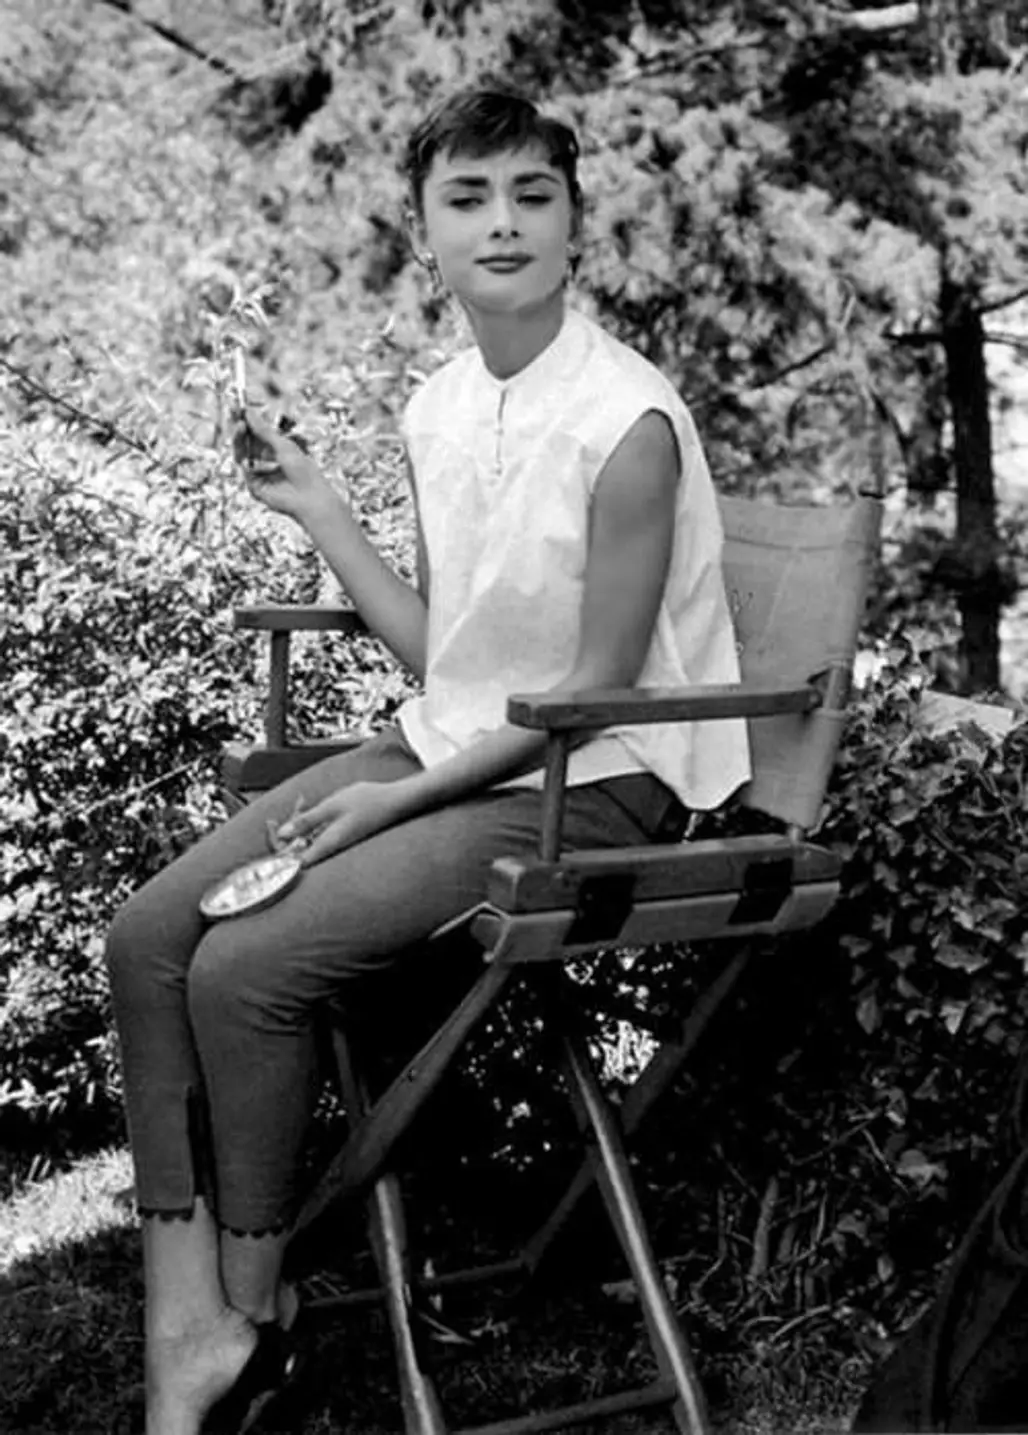 50 Pictures of Audrey Hepburn a Study of Timeless Style and Beauty ...